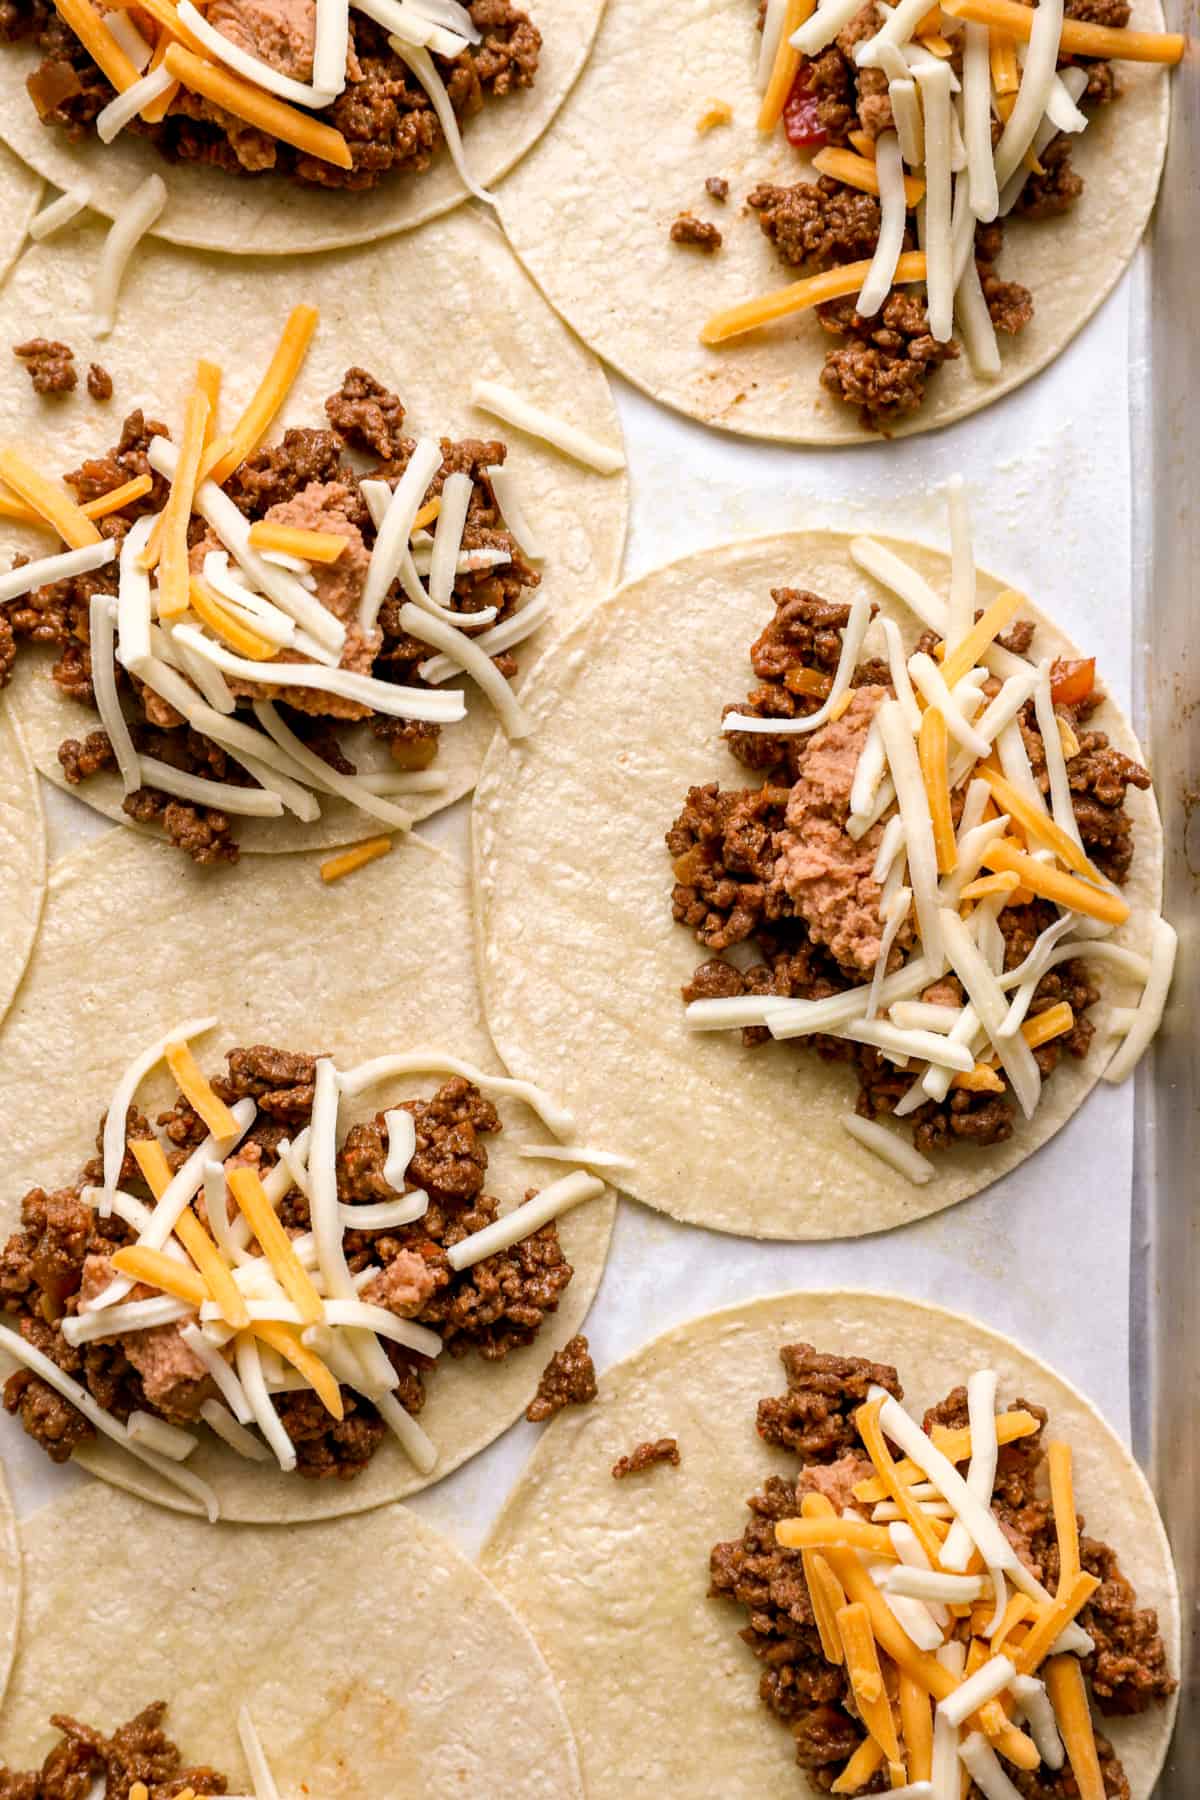 corn tortillas layered with ground beef, beans, and cheese from above.